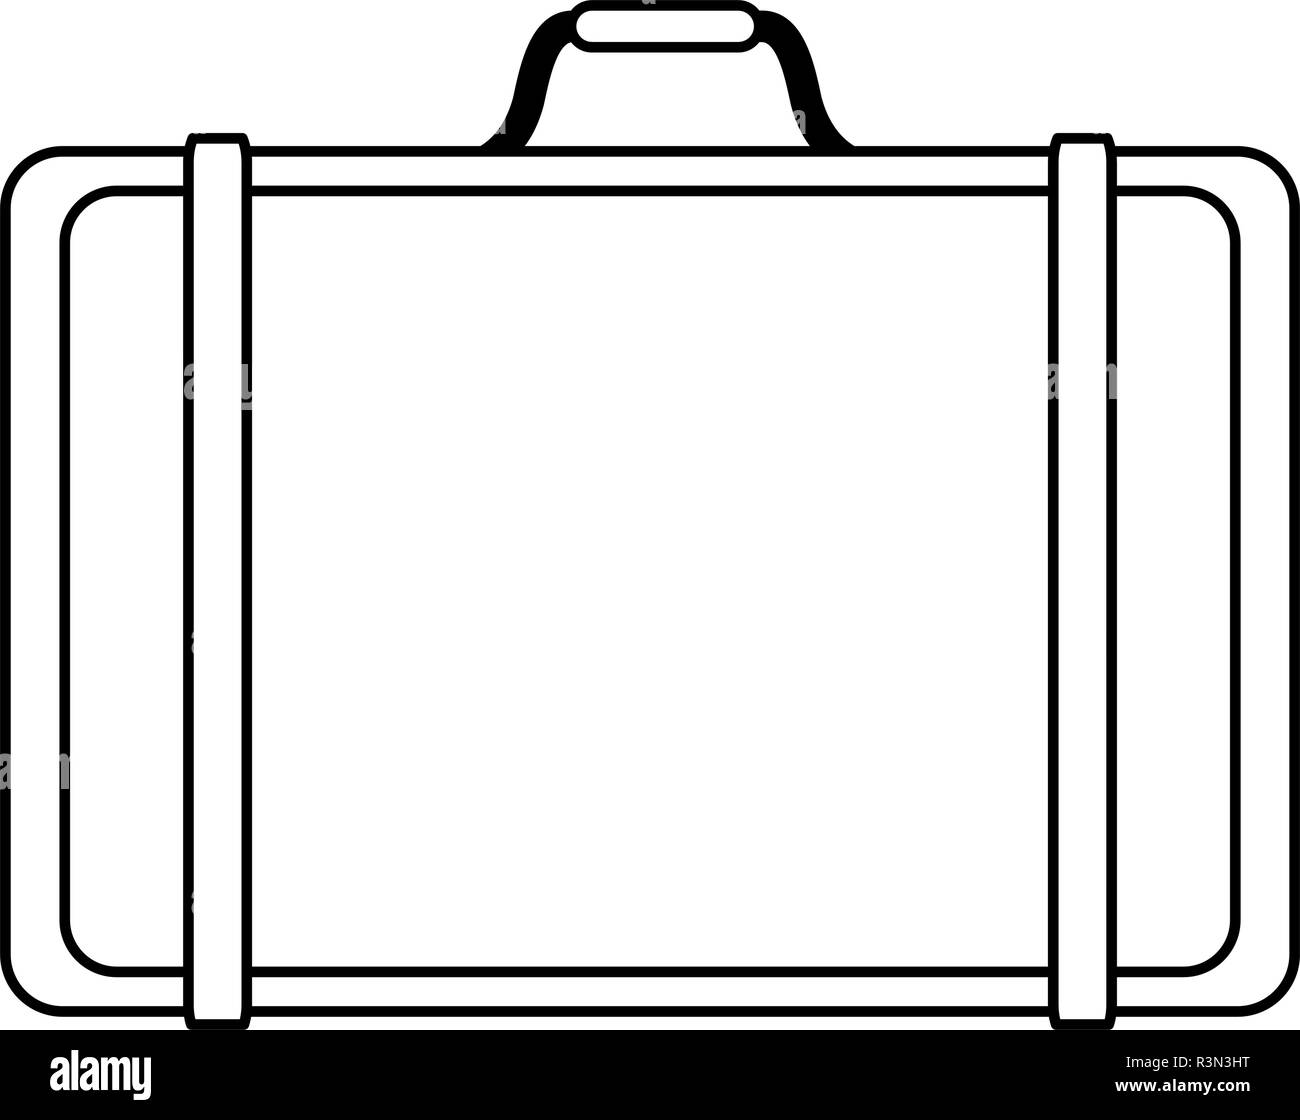 Luggage Label Suitcase Black and White Stock Photos & Images - Alamy Regarding Blank Suitcase Template